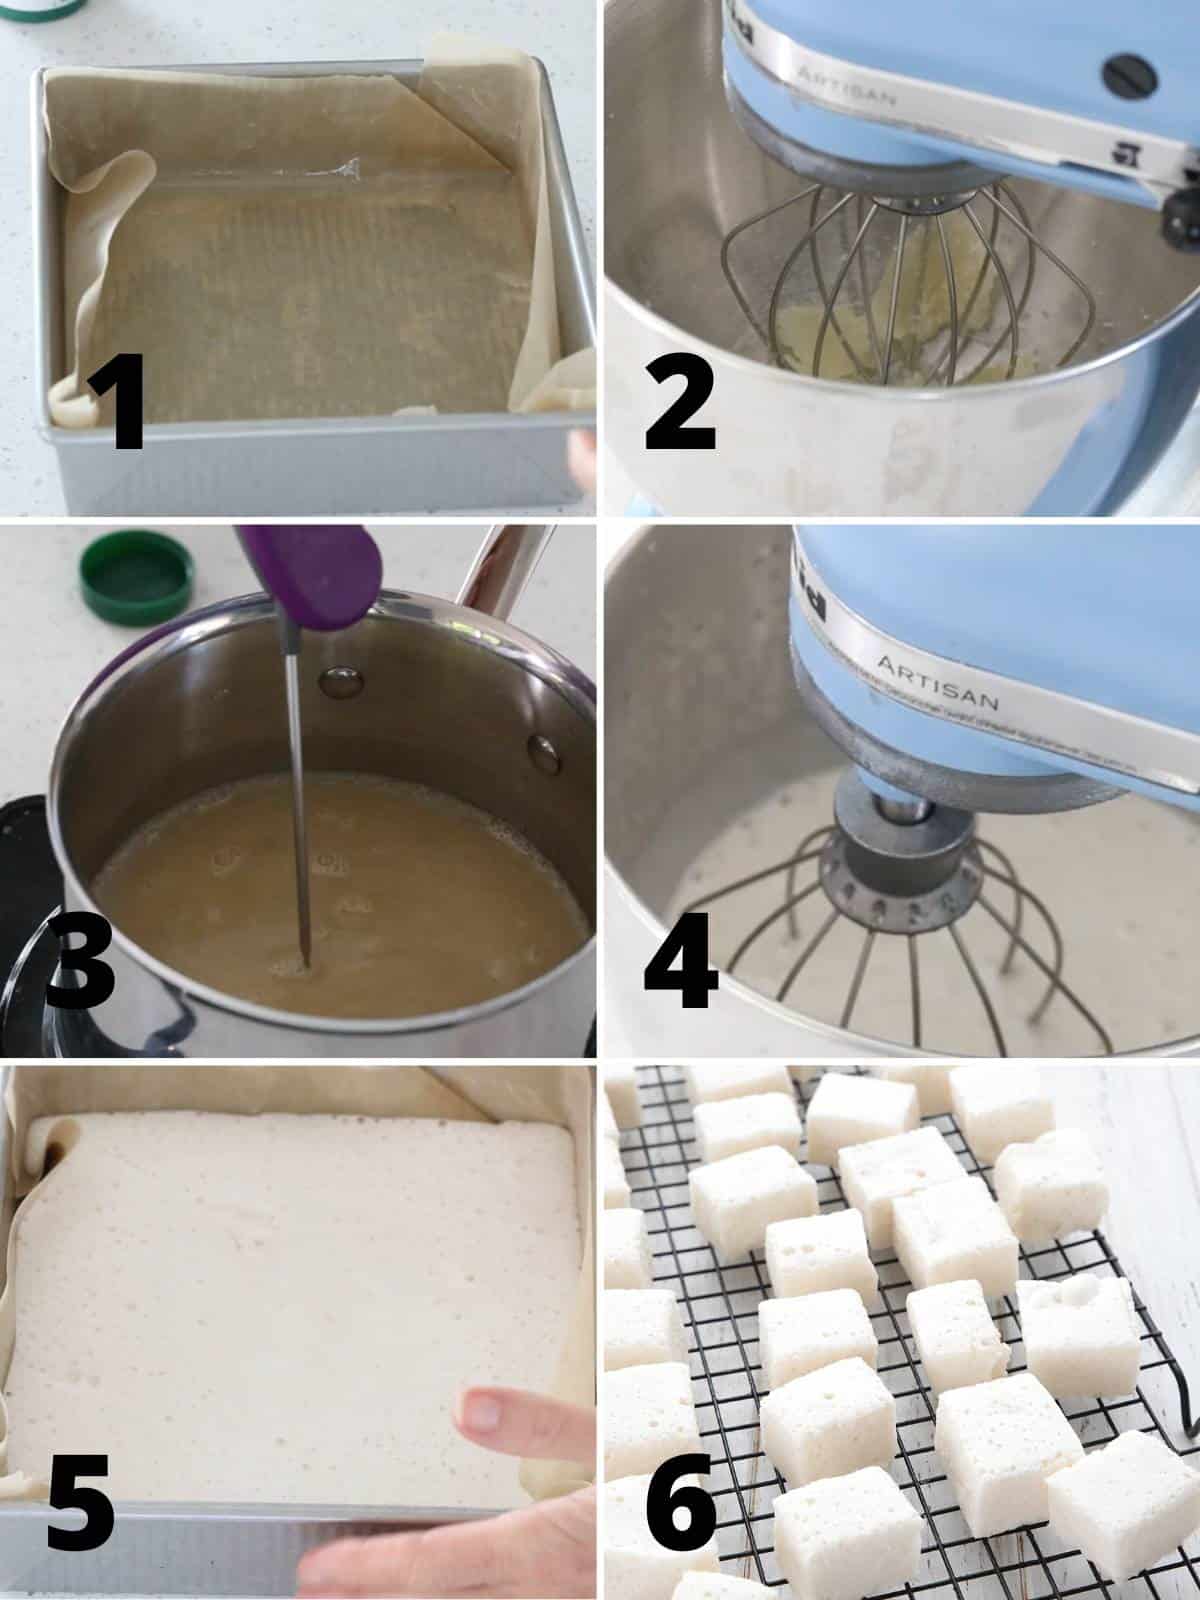 A collage of 6 images showing how to make sugar free marshmallows.